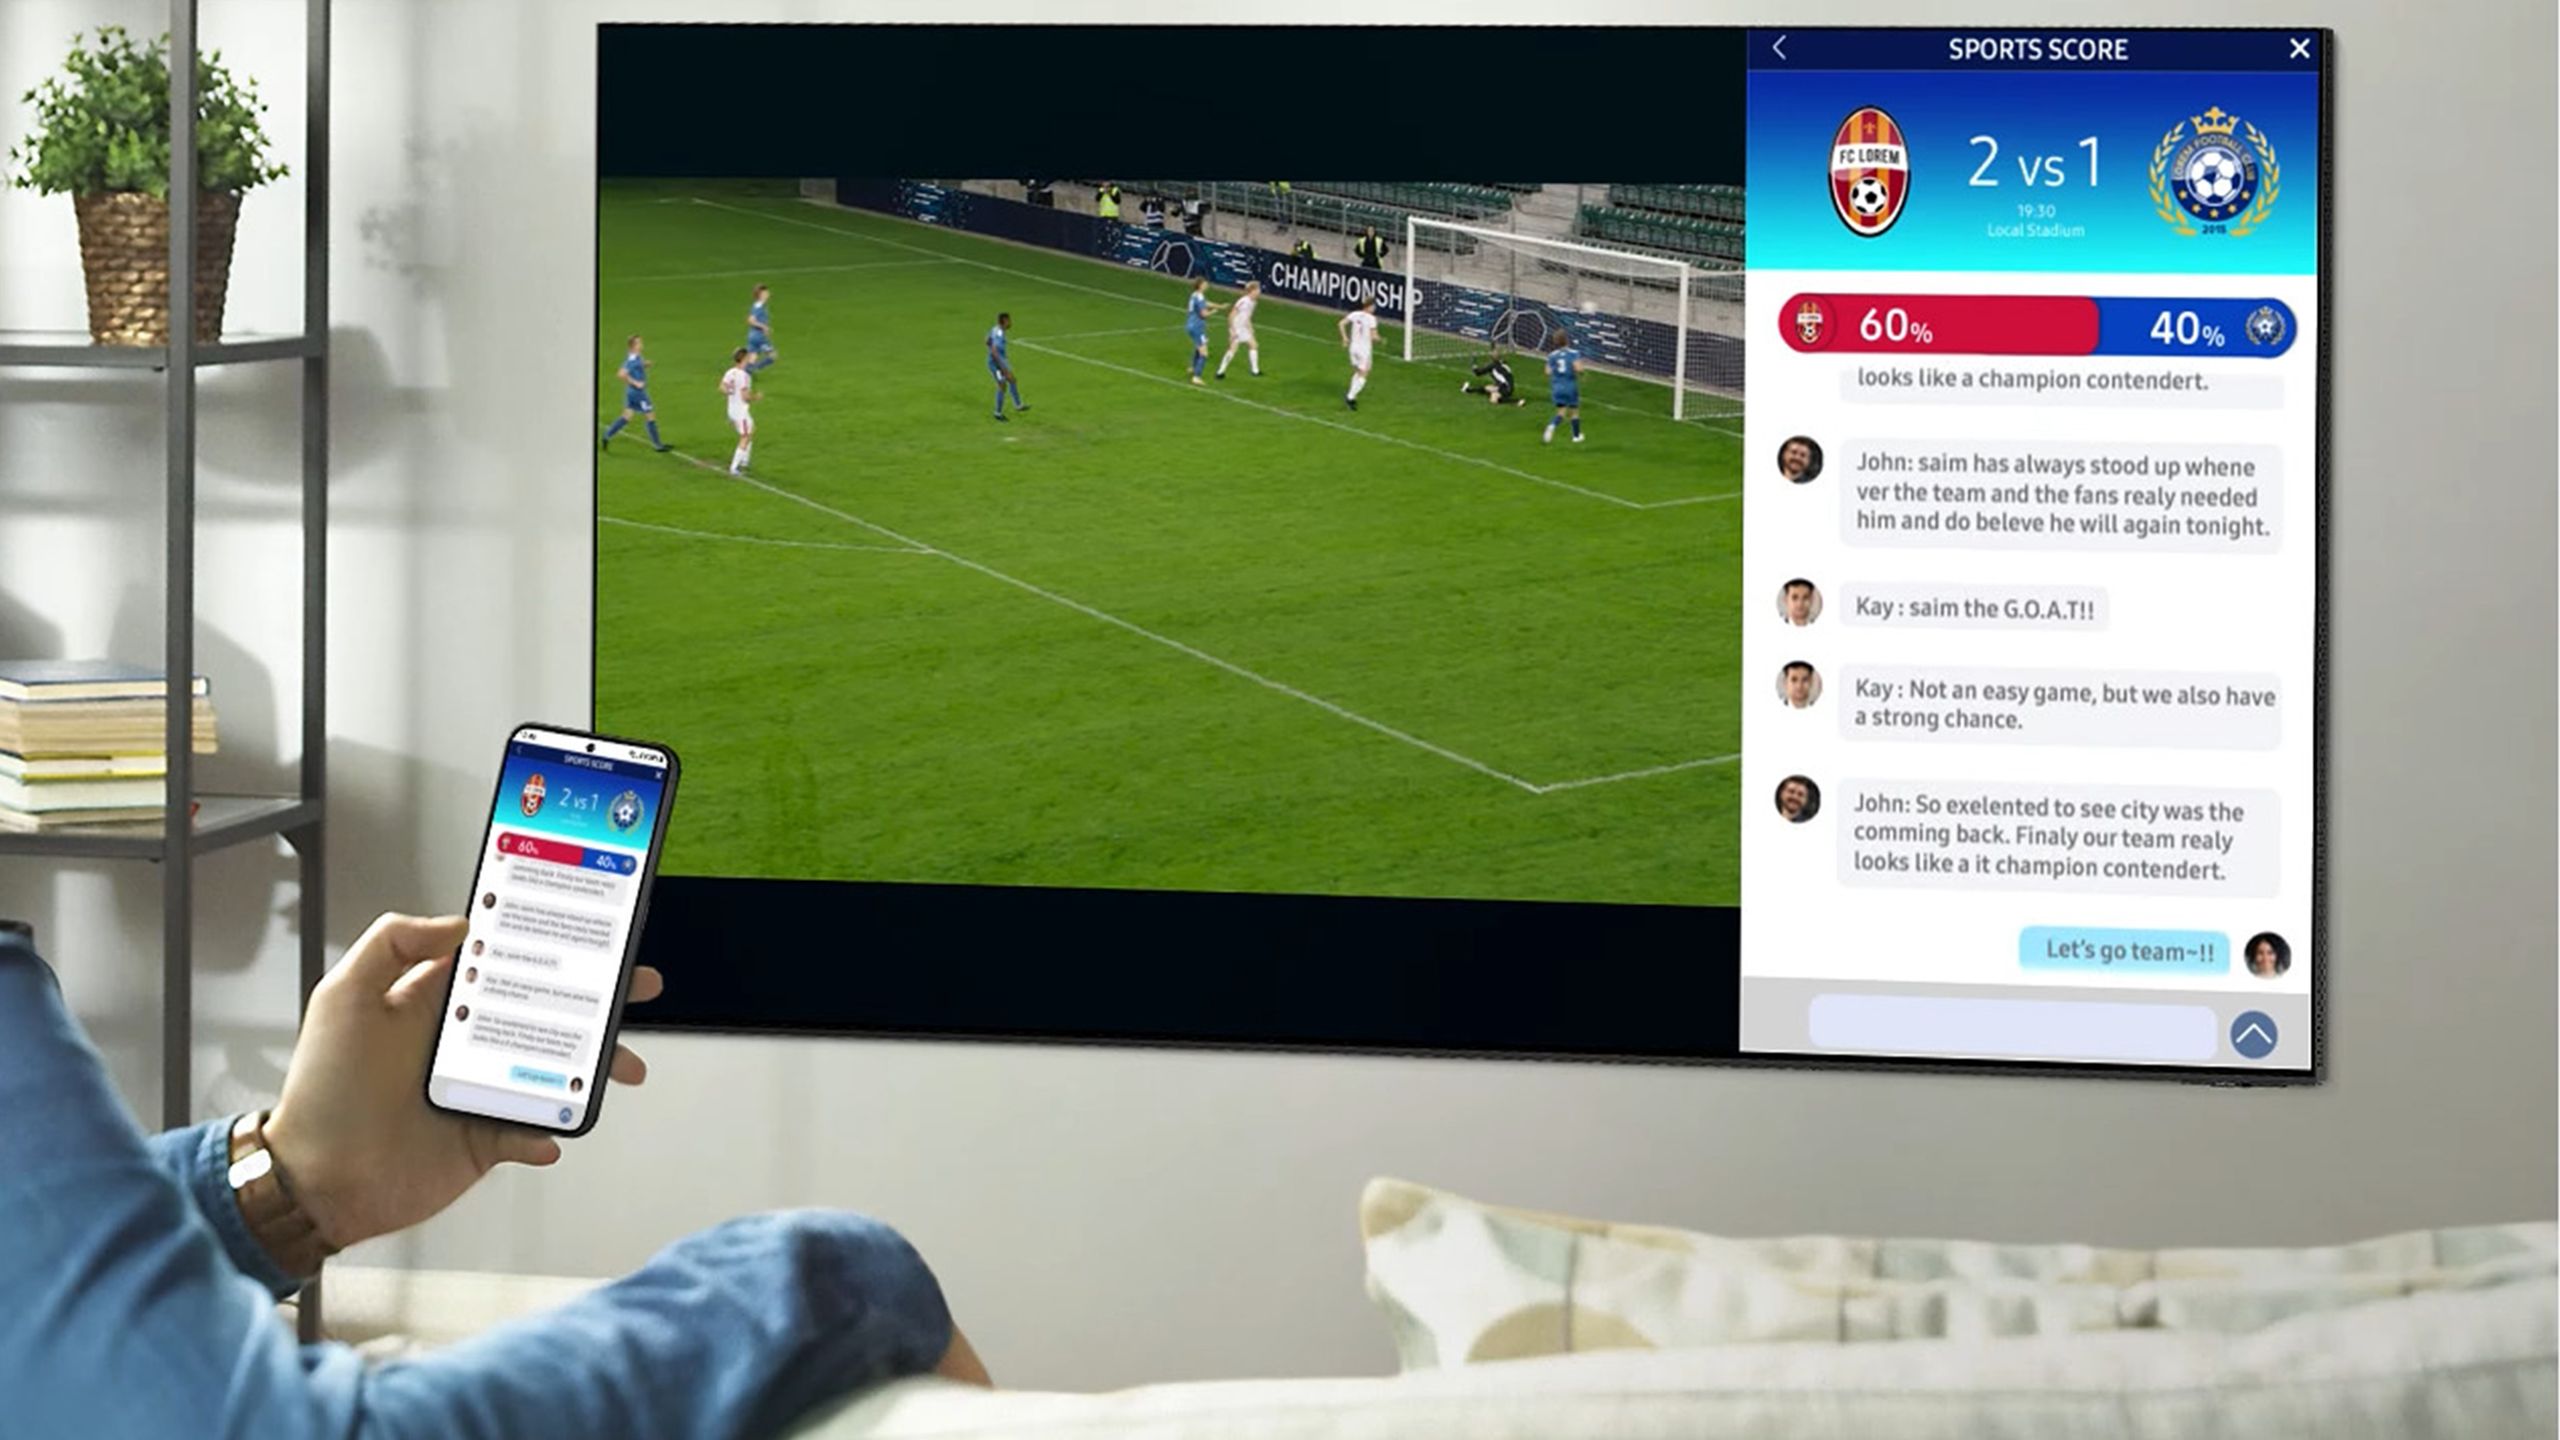 Samsung TV showing soccer game and text chain cast by smartphone